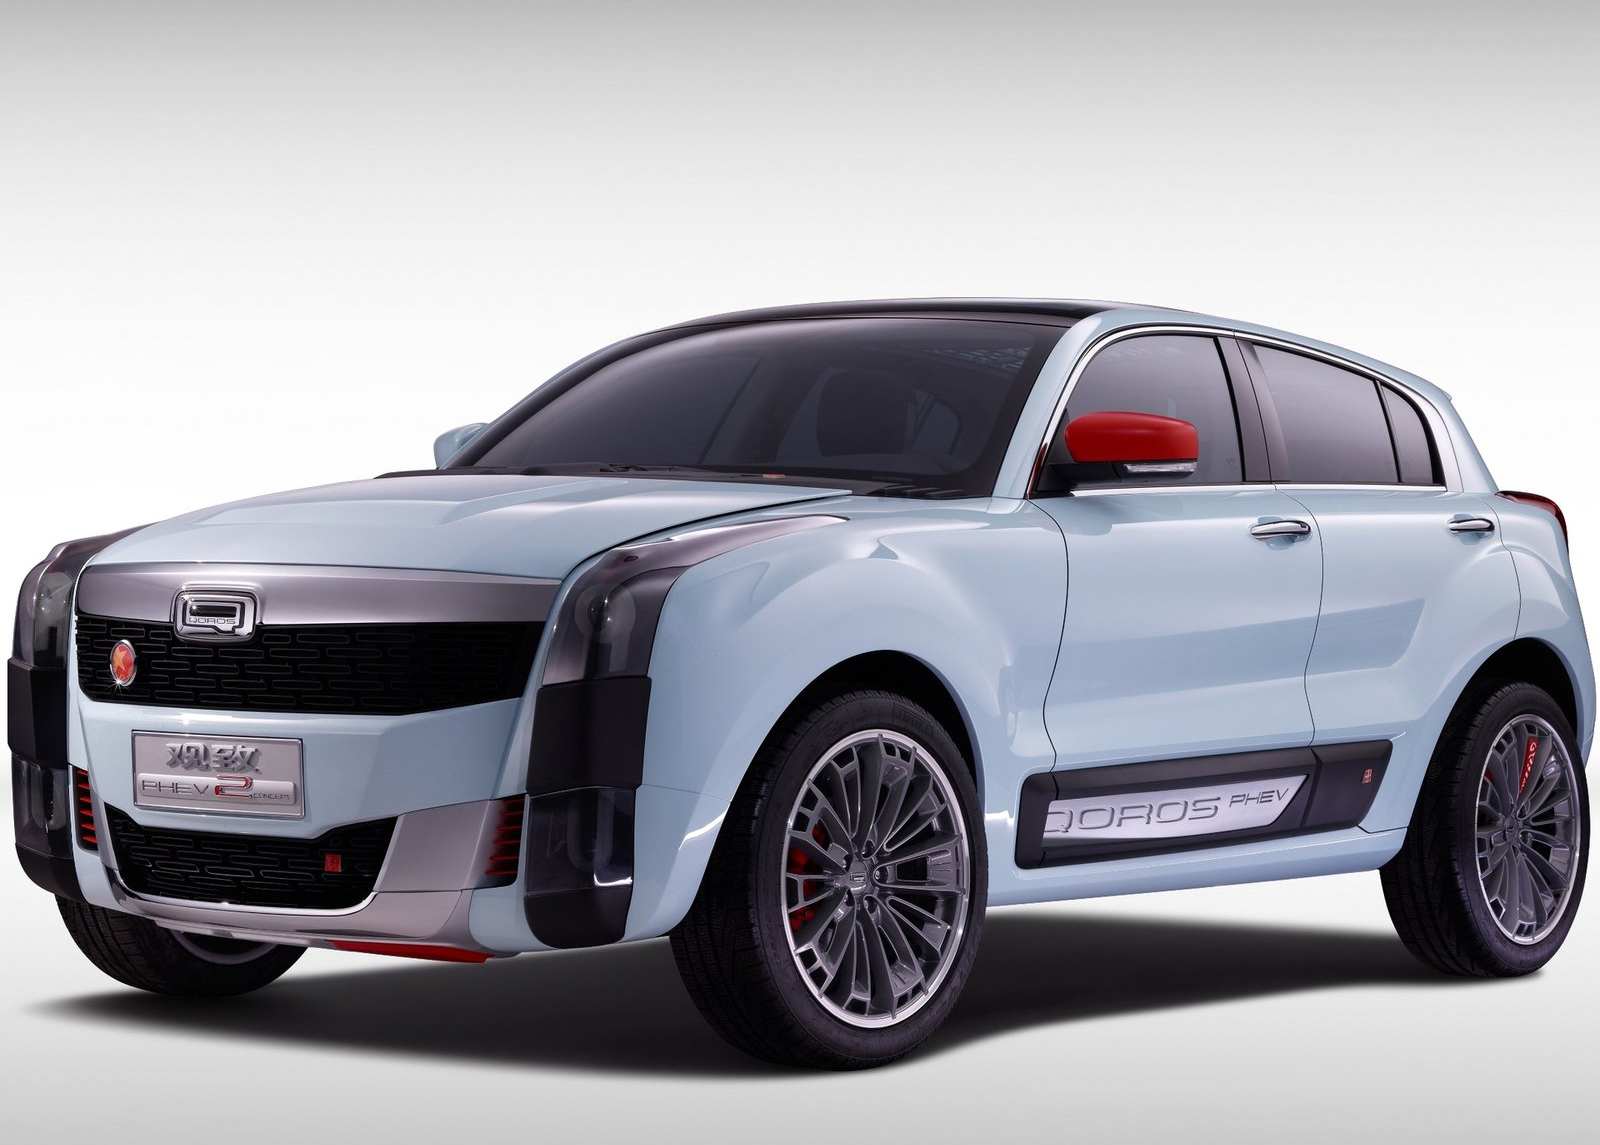 2015 Qoros 2 SUV PHEV Concept News and Information, Research, and Pricing